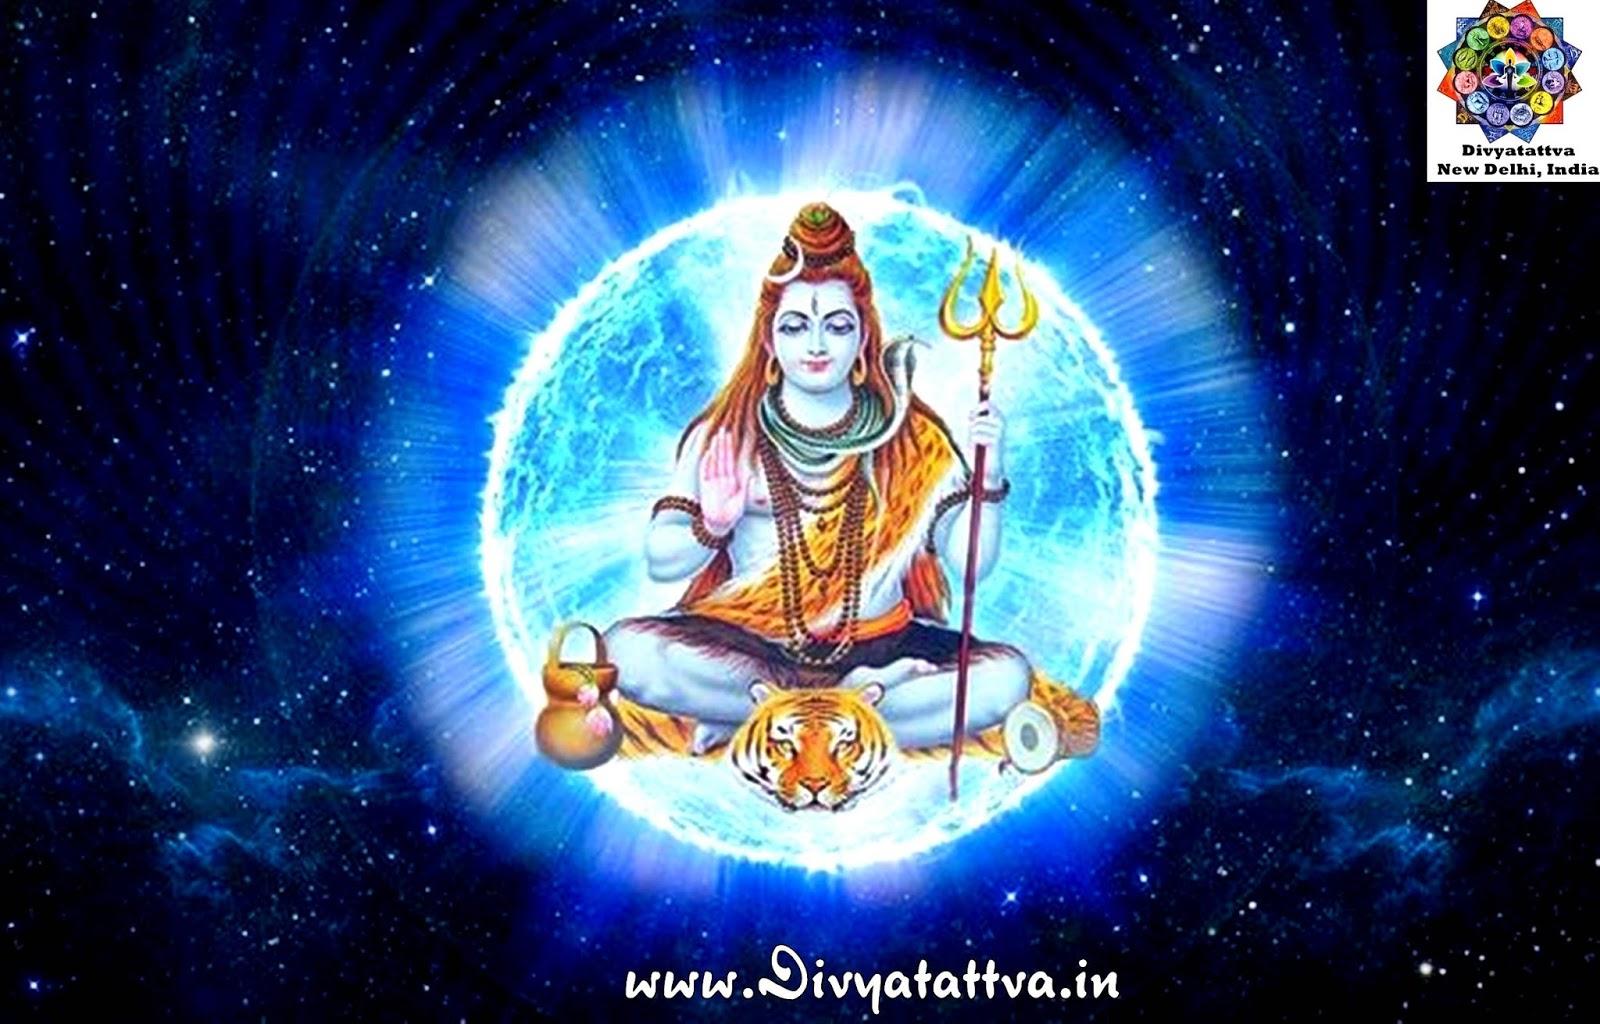 Animated Lord Shiva Lingam Wallpaper HD The Galleries of HD